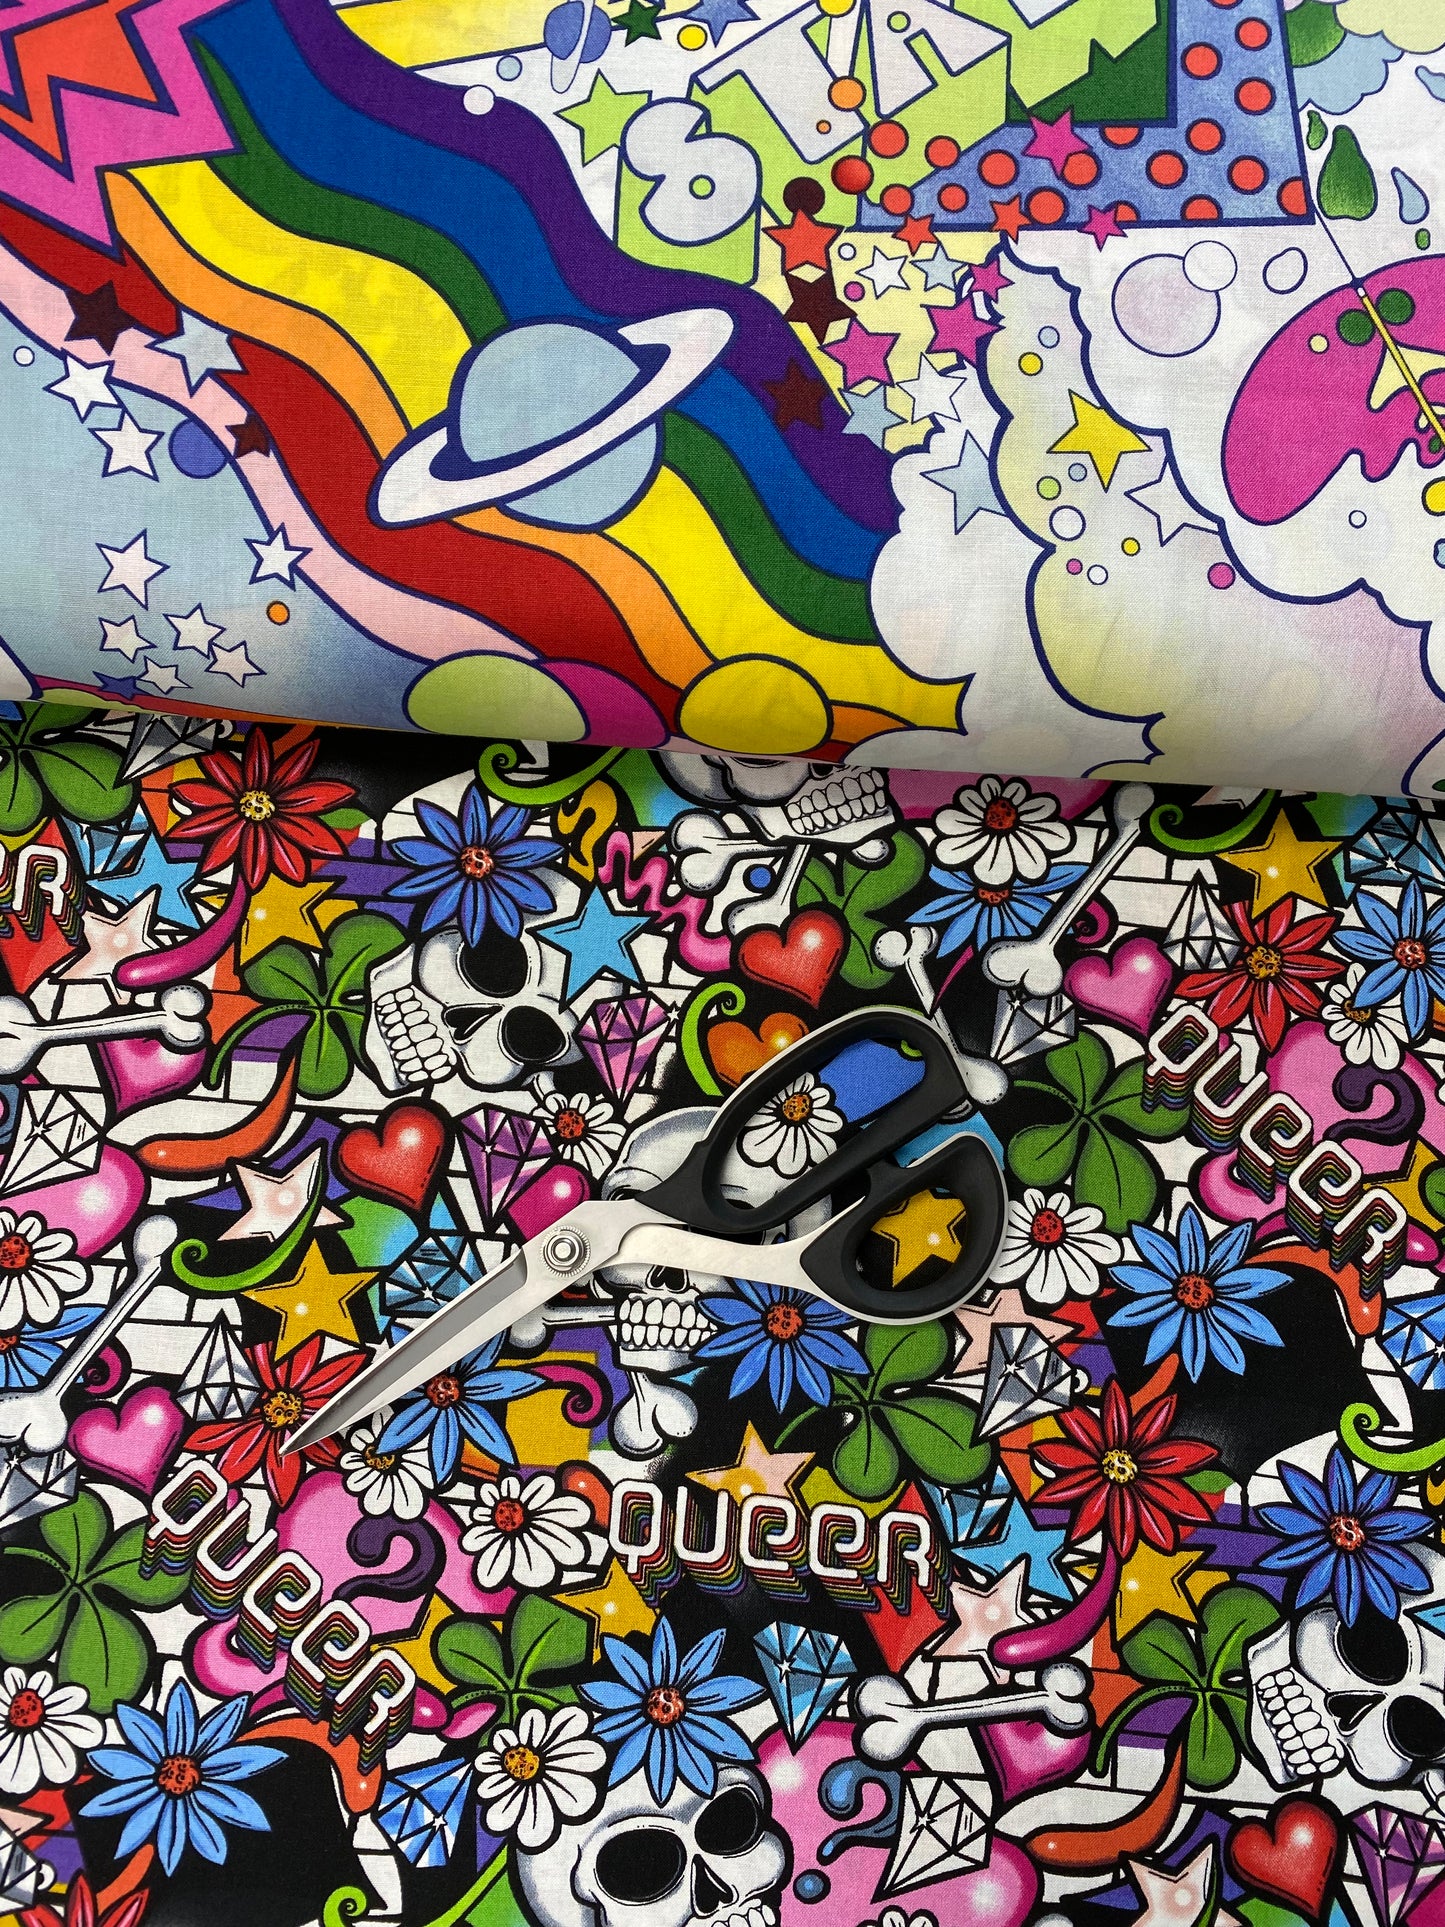 Love is Love Queer Street Black    8945A Cotton Woven Fabric